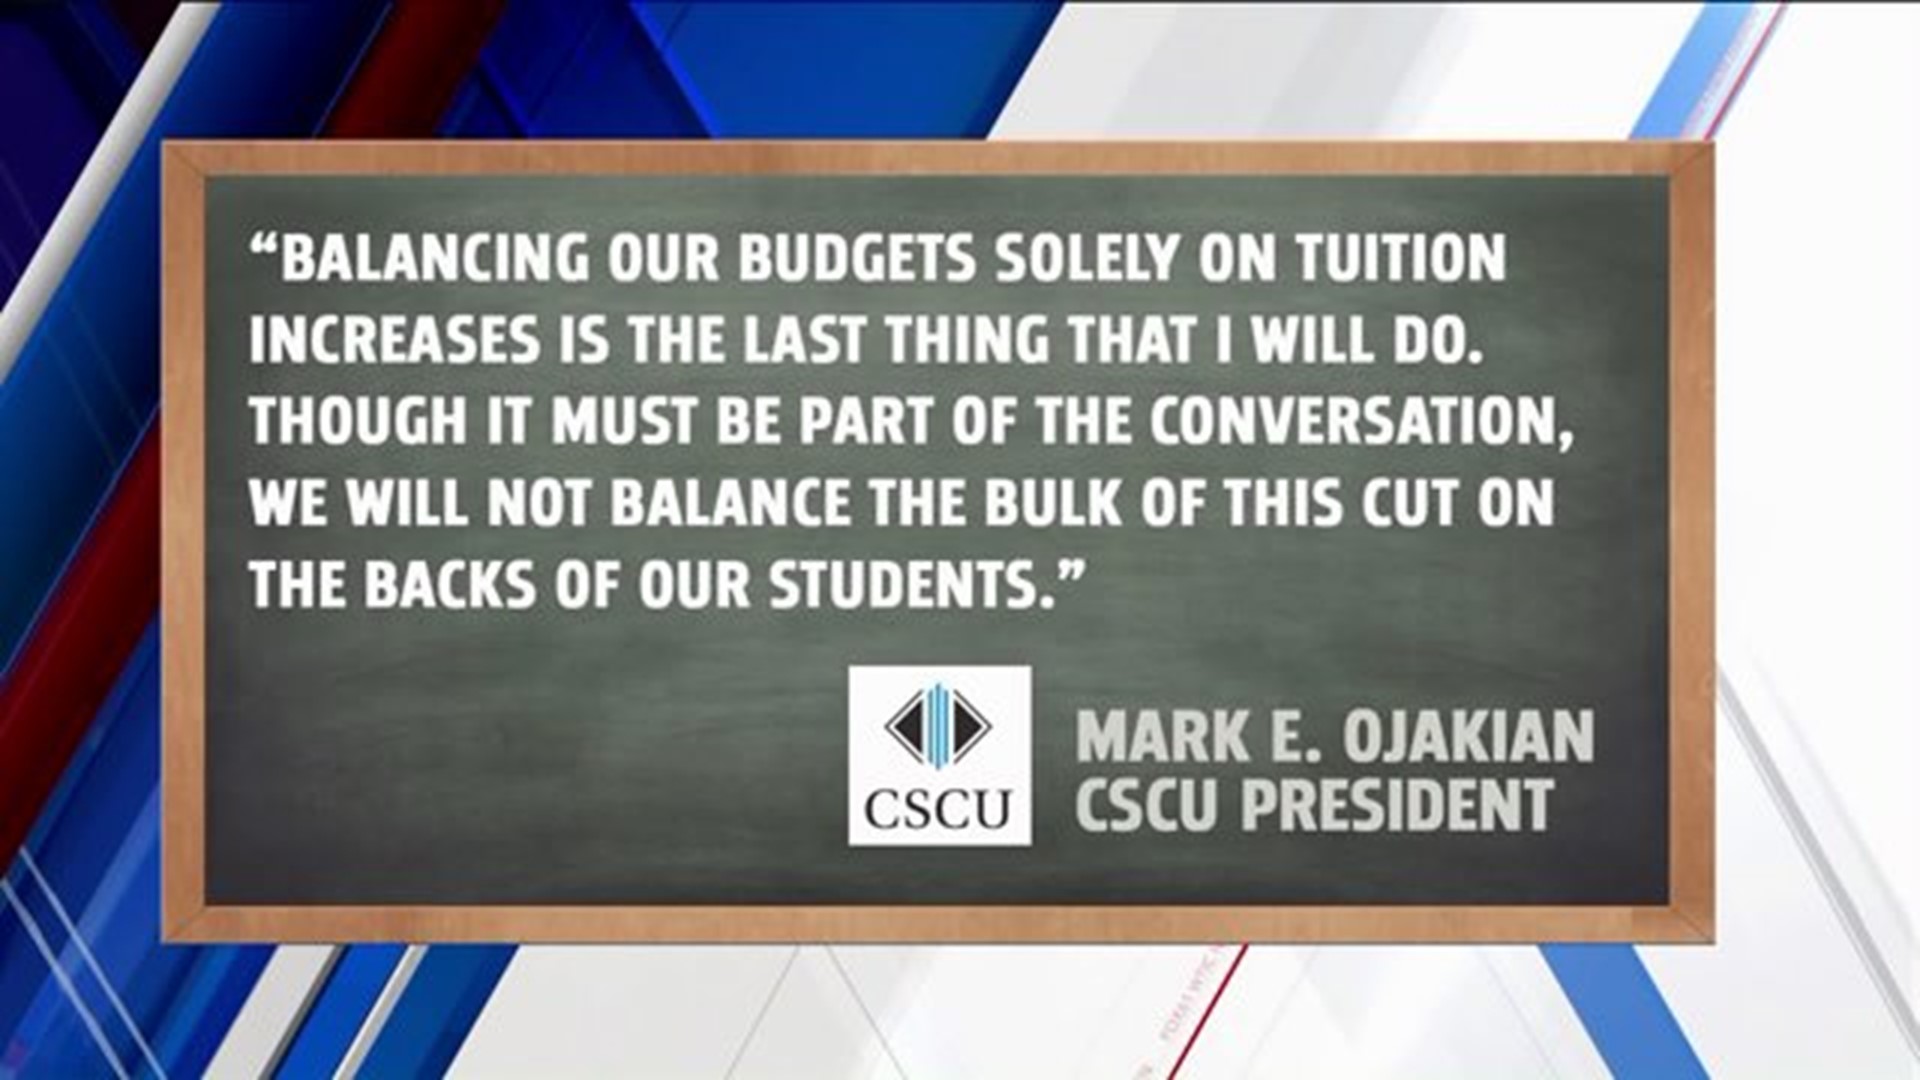 Students raise concerns over the possibility of increased tuition hikes